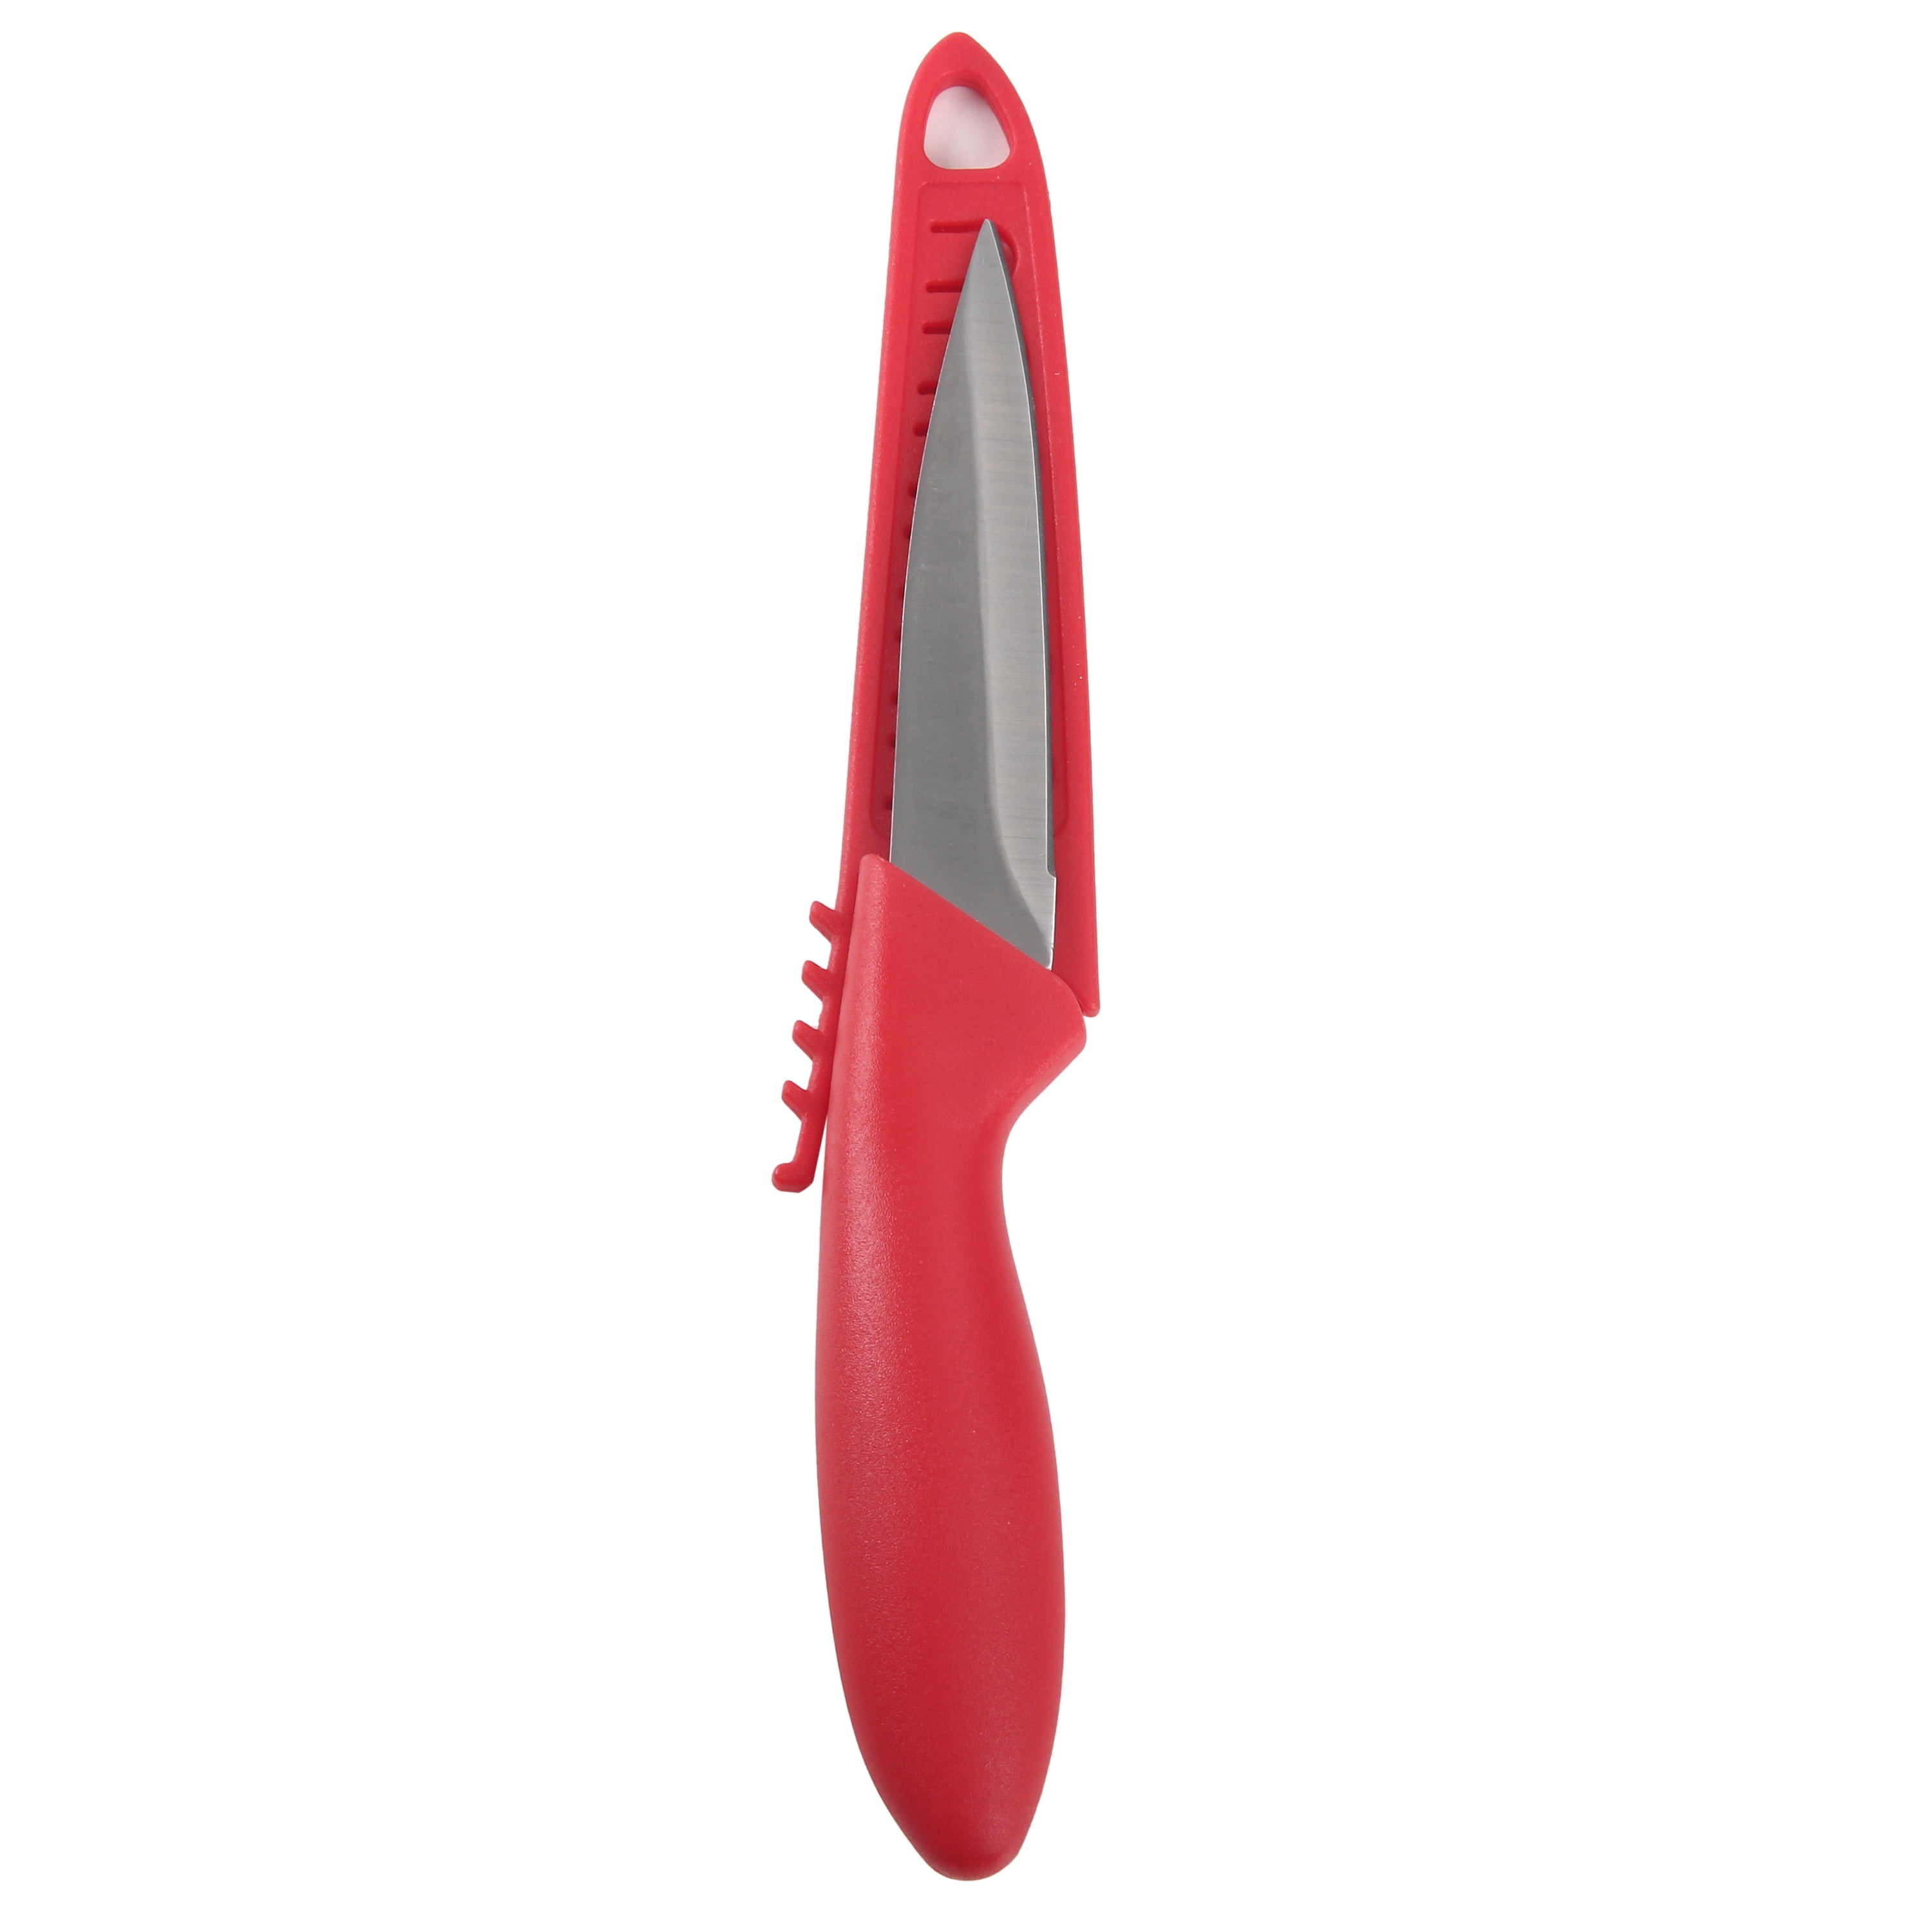 Top Cutlery German Paring Knife 3.25 Stainless Micro Serrated Blade, Red  Handle - KnifeCenter - TC17343R